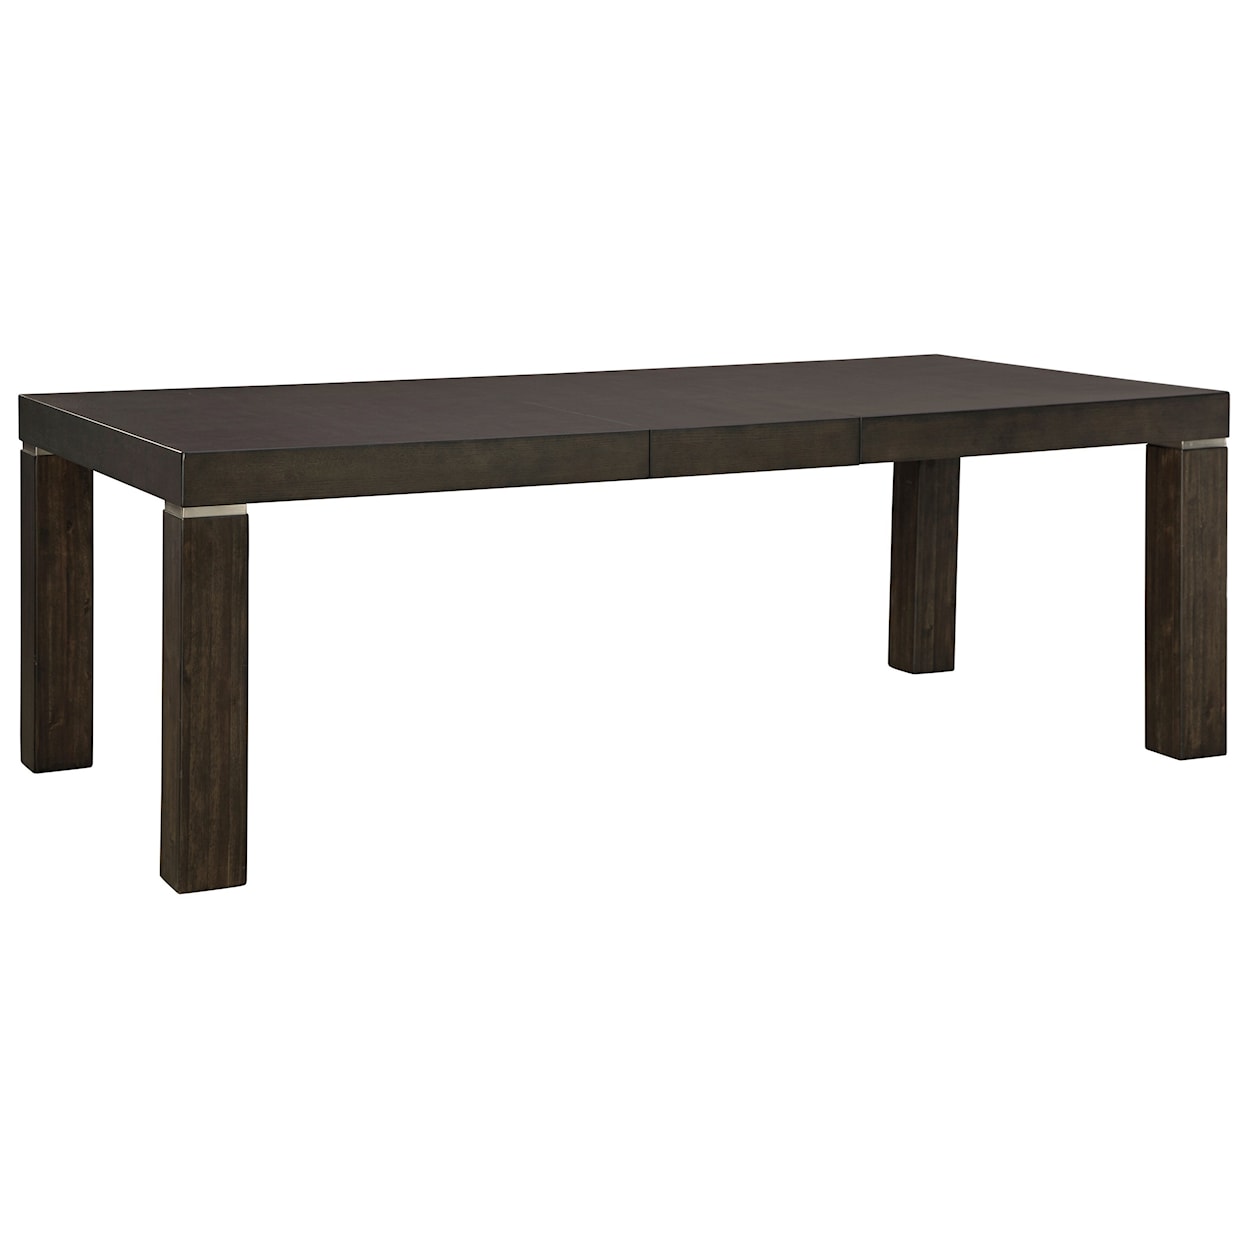 Signature Design by Ashley Furniture Hyndell Rectangular Dining Room Extension Table